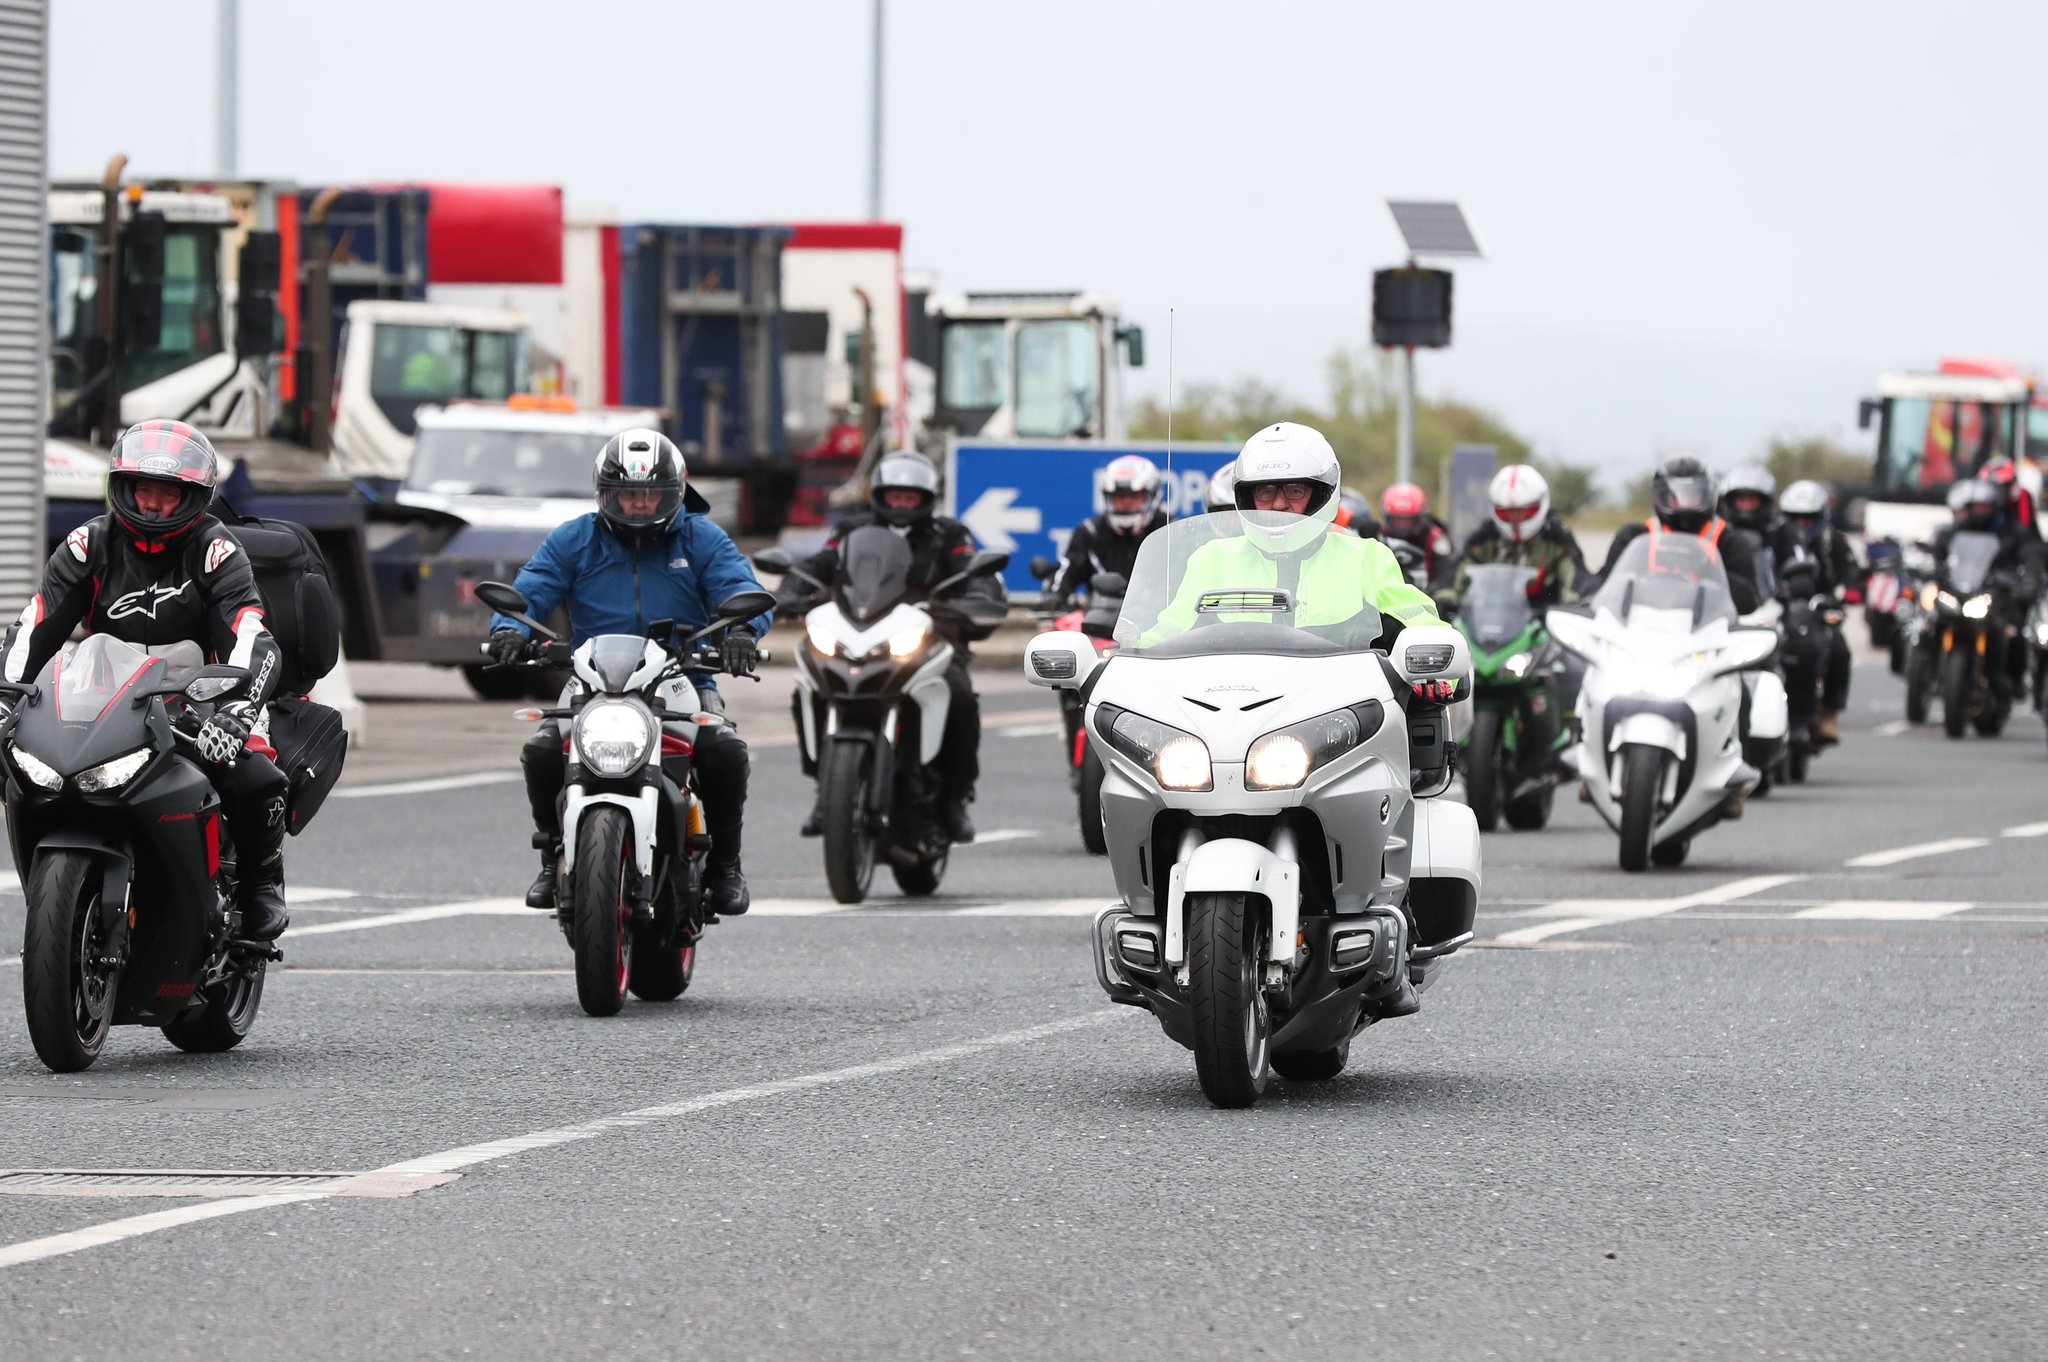 North West 200 – crowds building to record numbers ahead of weekend showpiece races